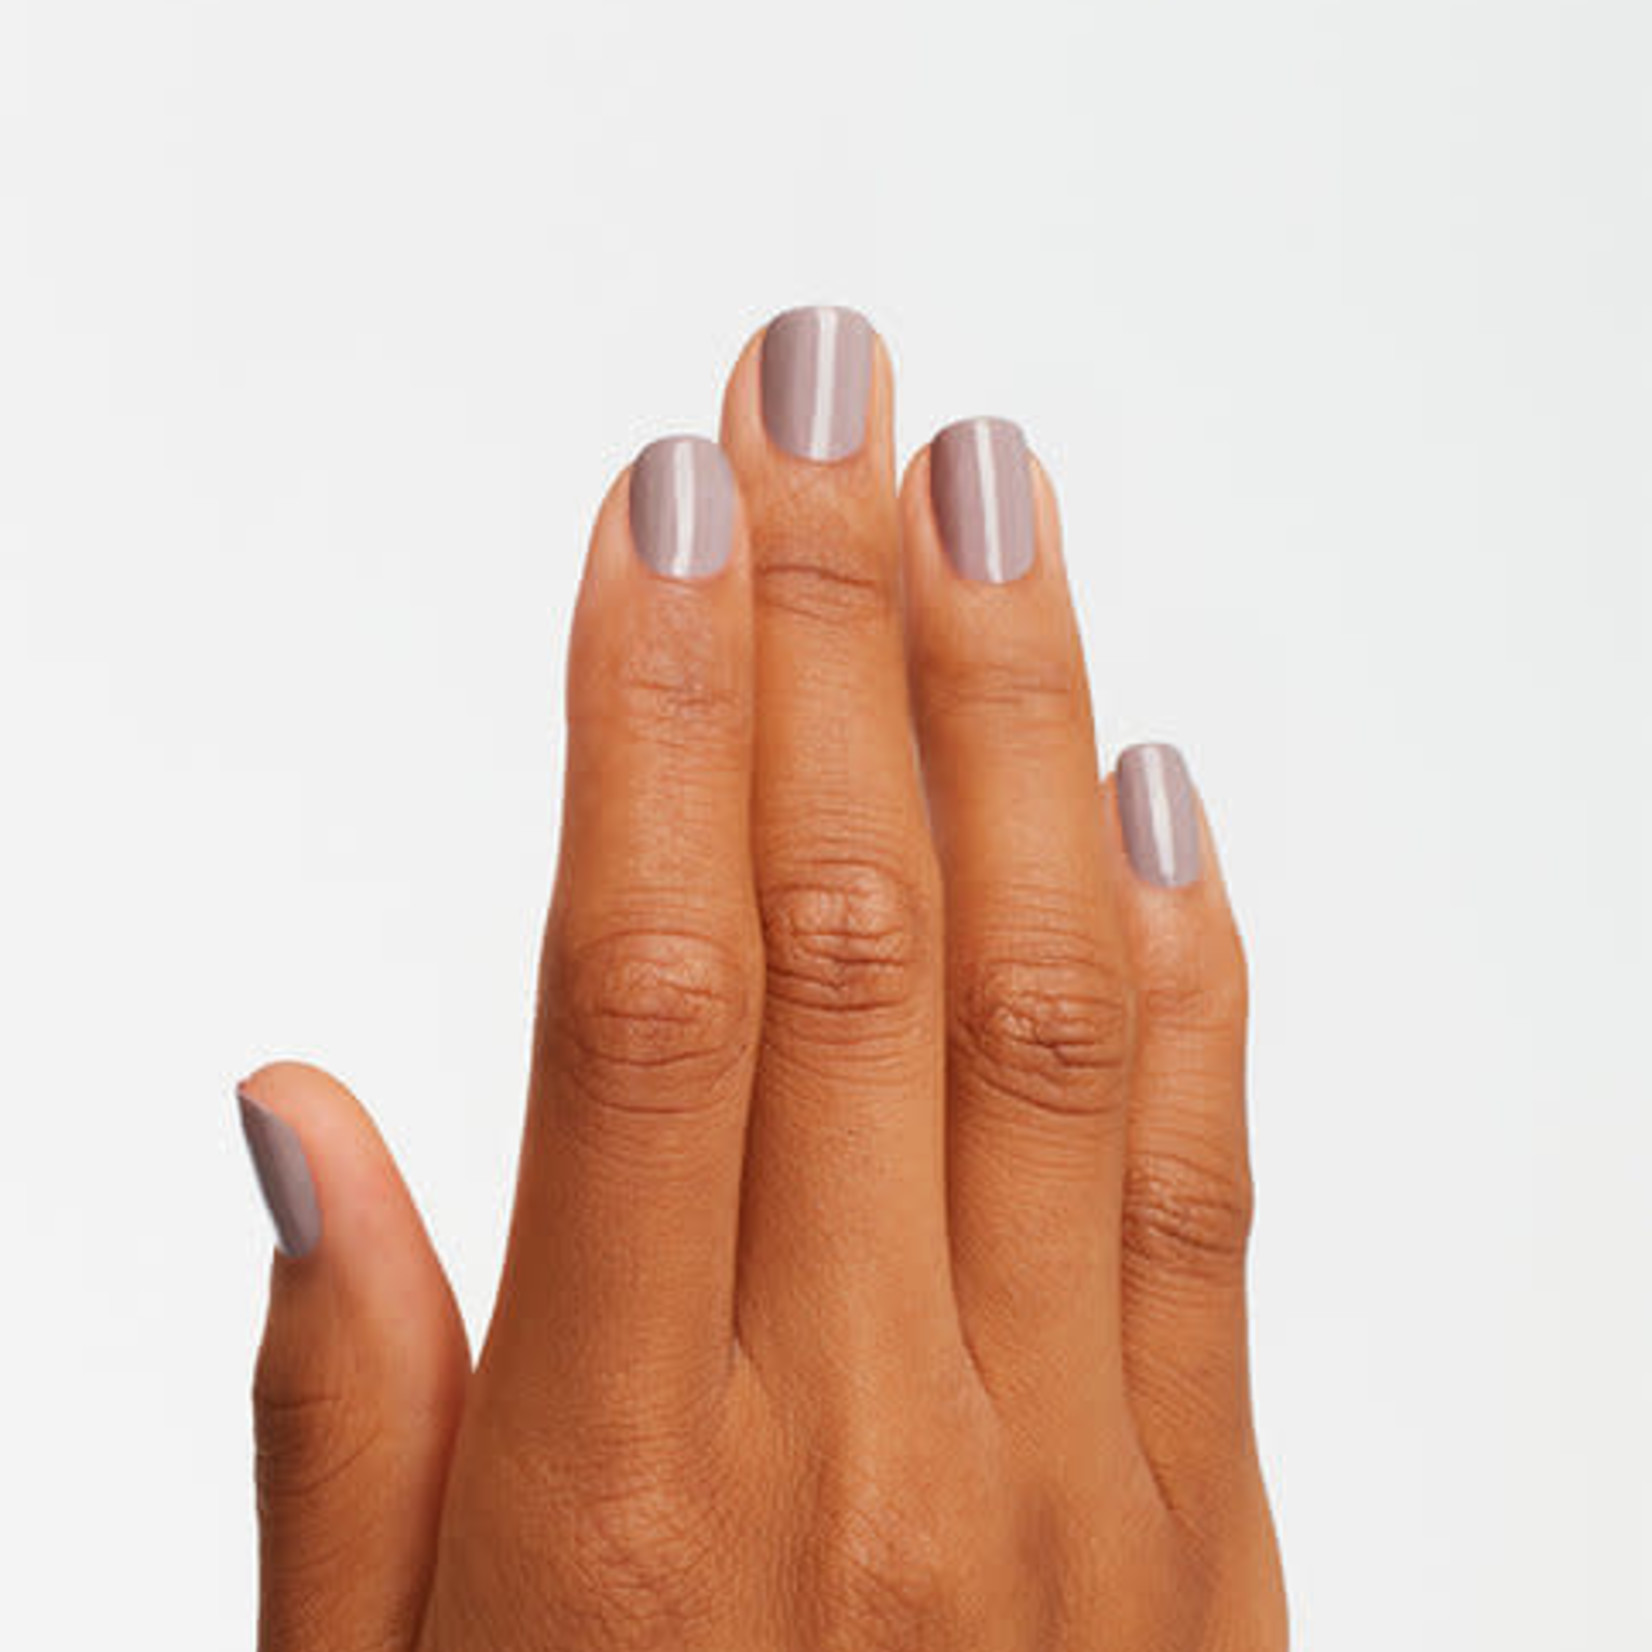 OPI OPI - A61 - Gel - Taupe-Less Beach